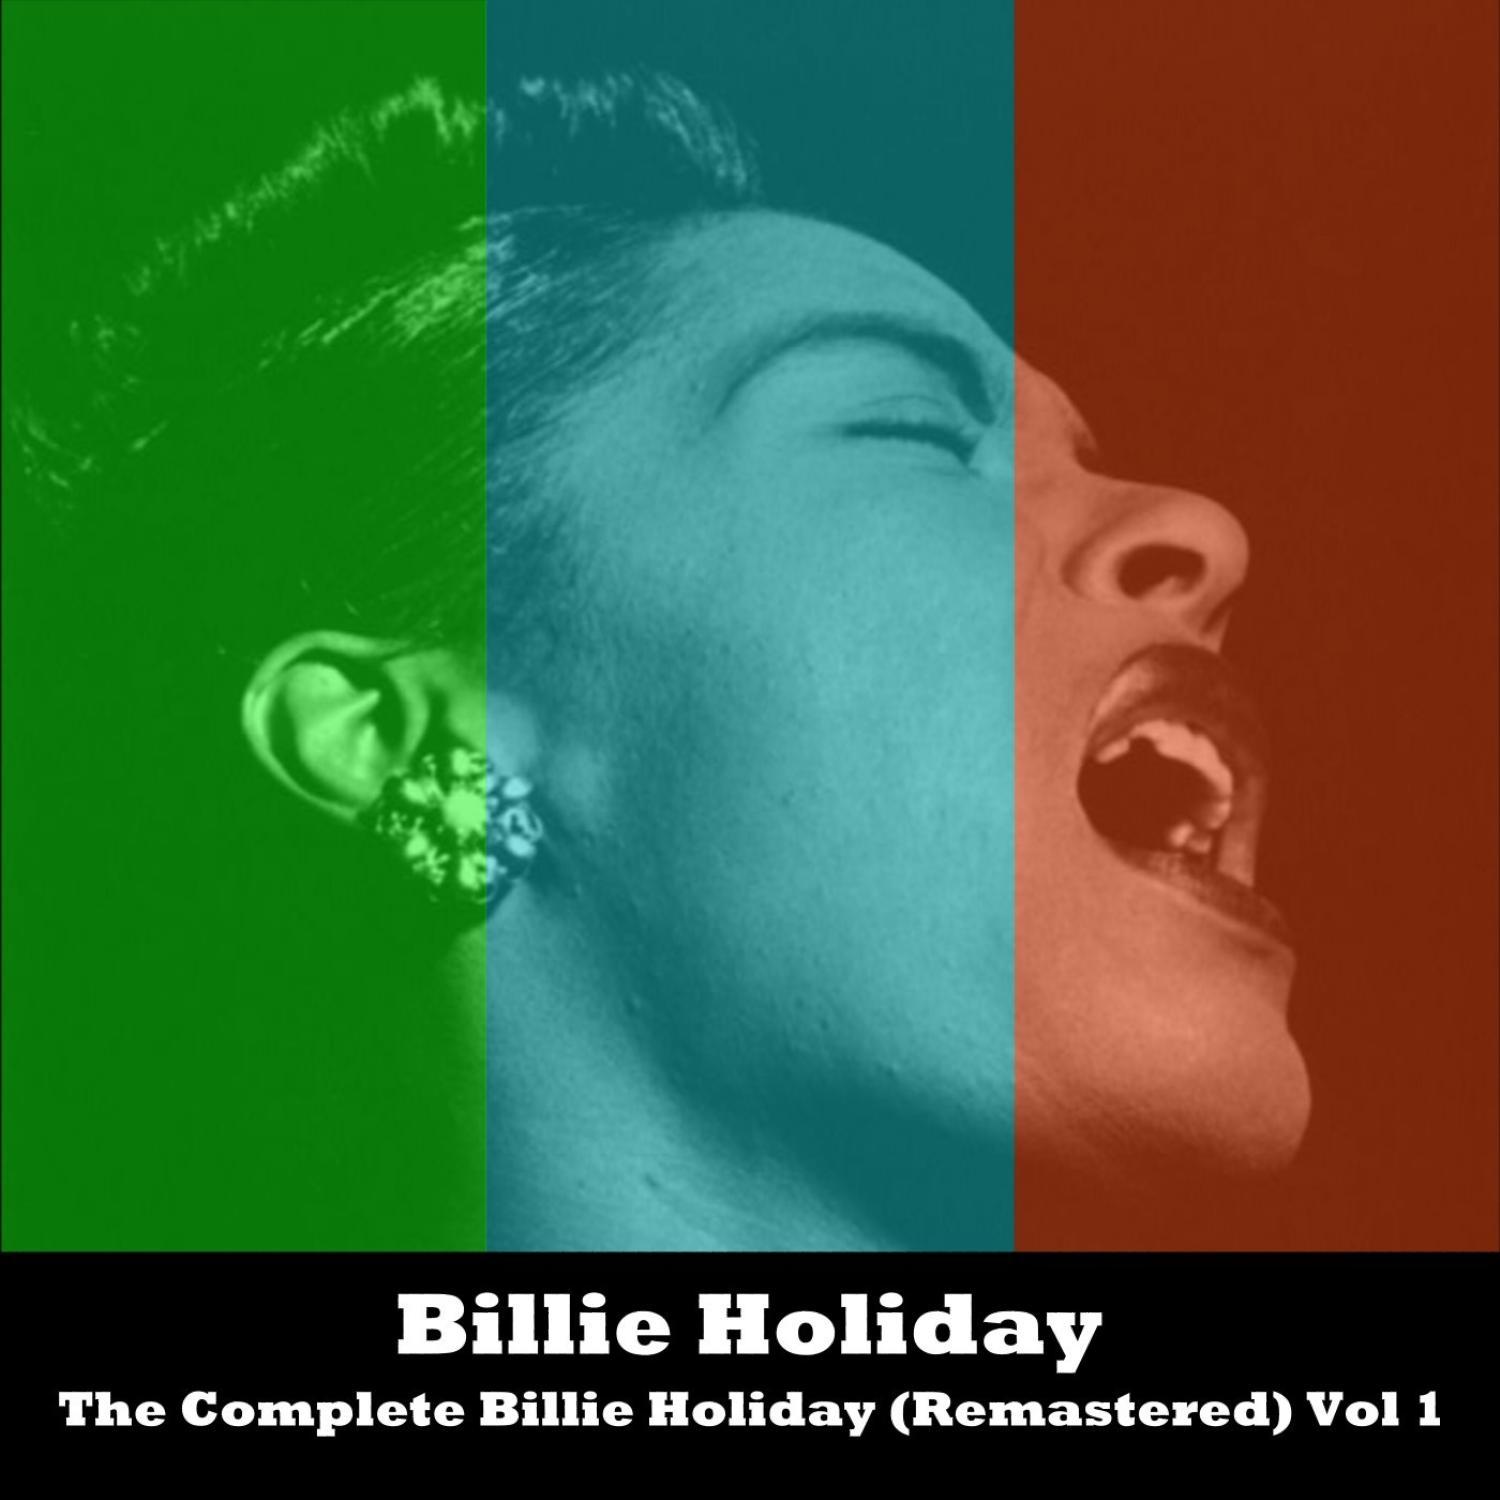 The Complete Billie Holiday (Remastered) Vol 1